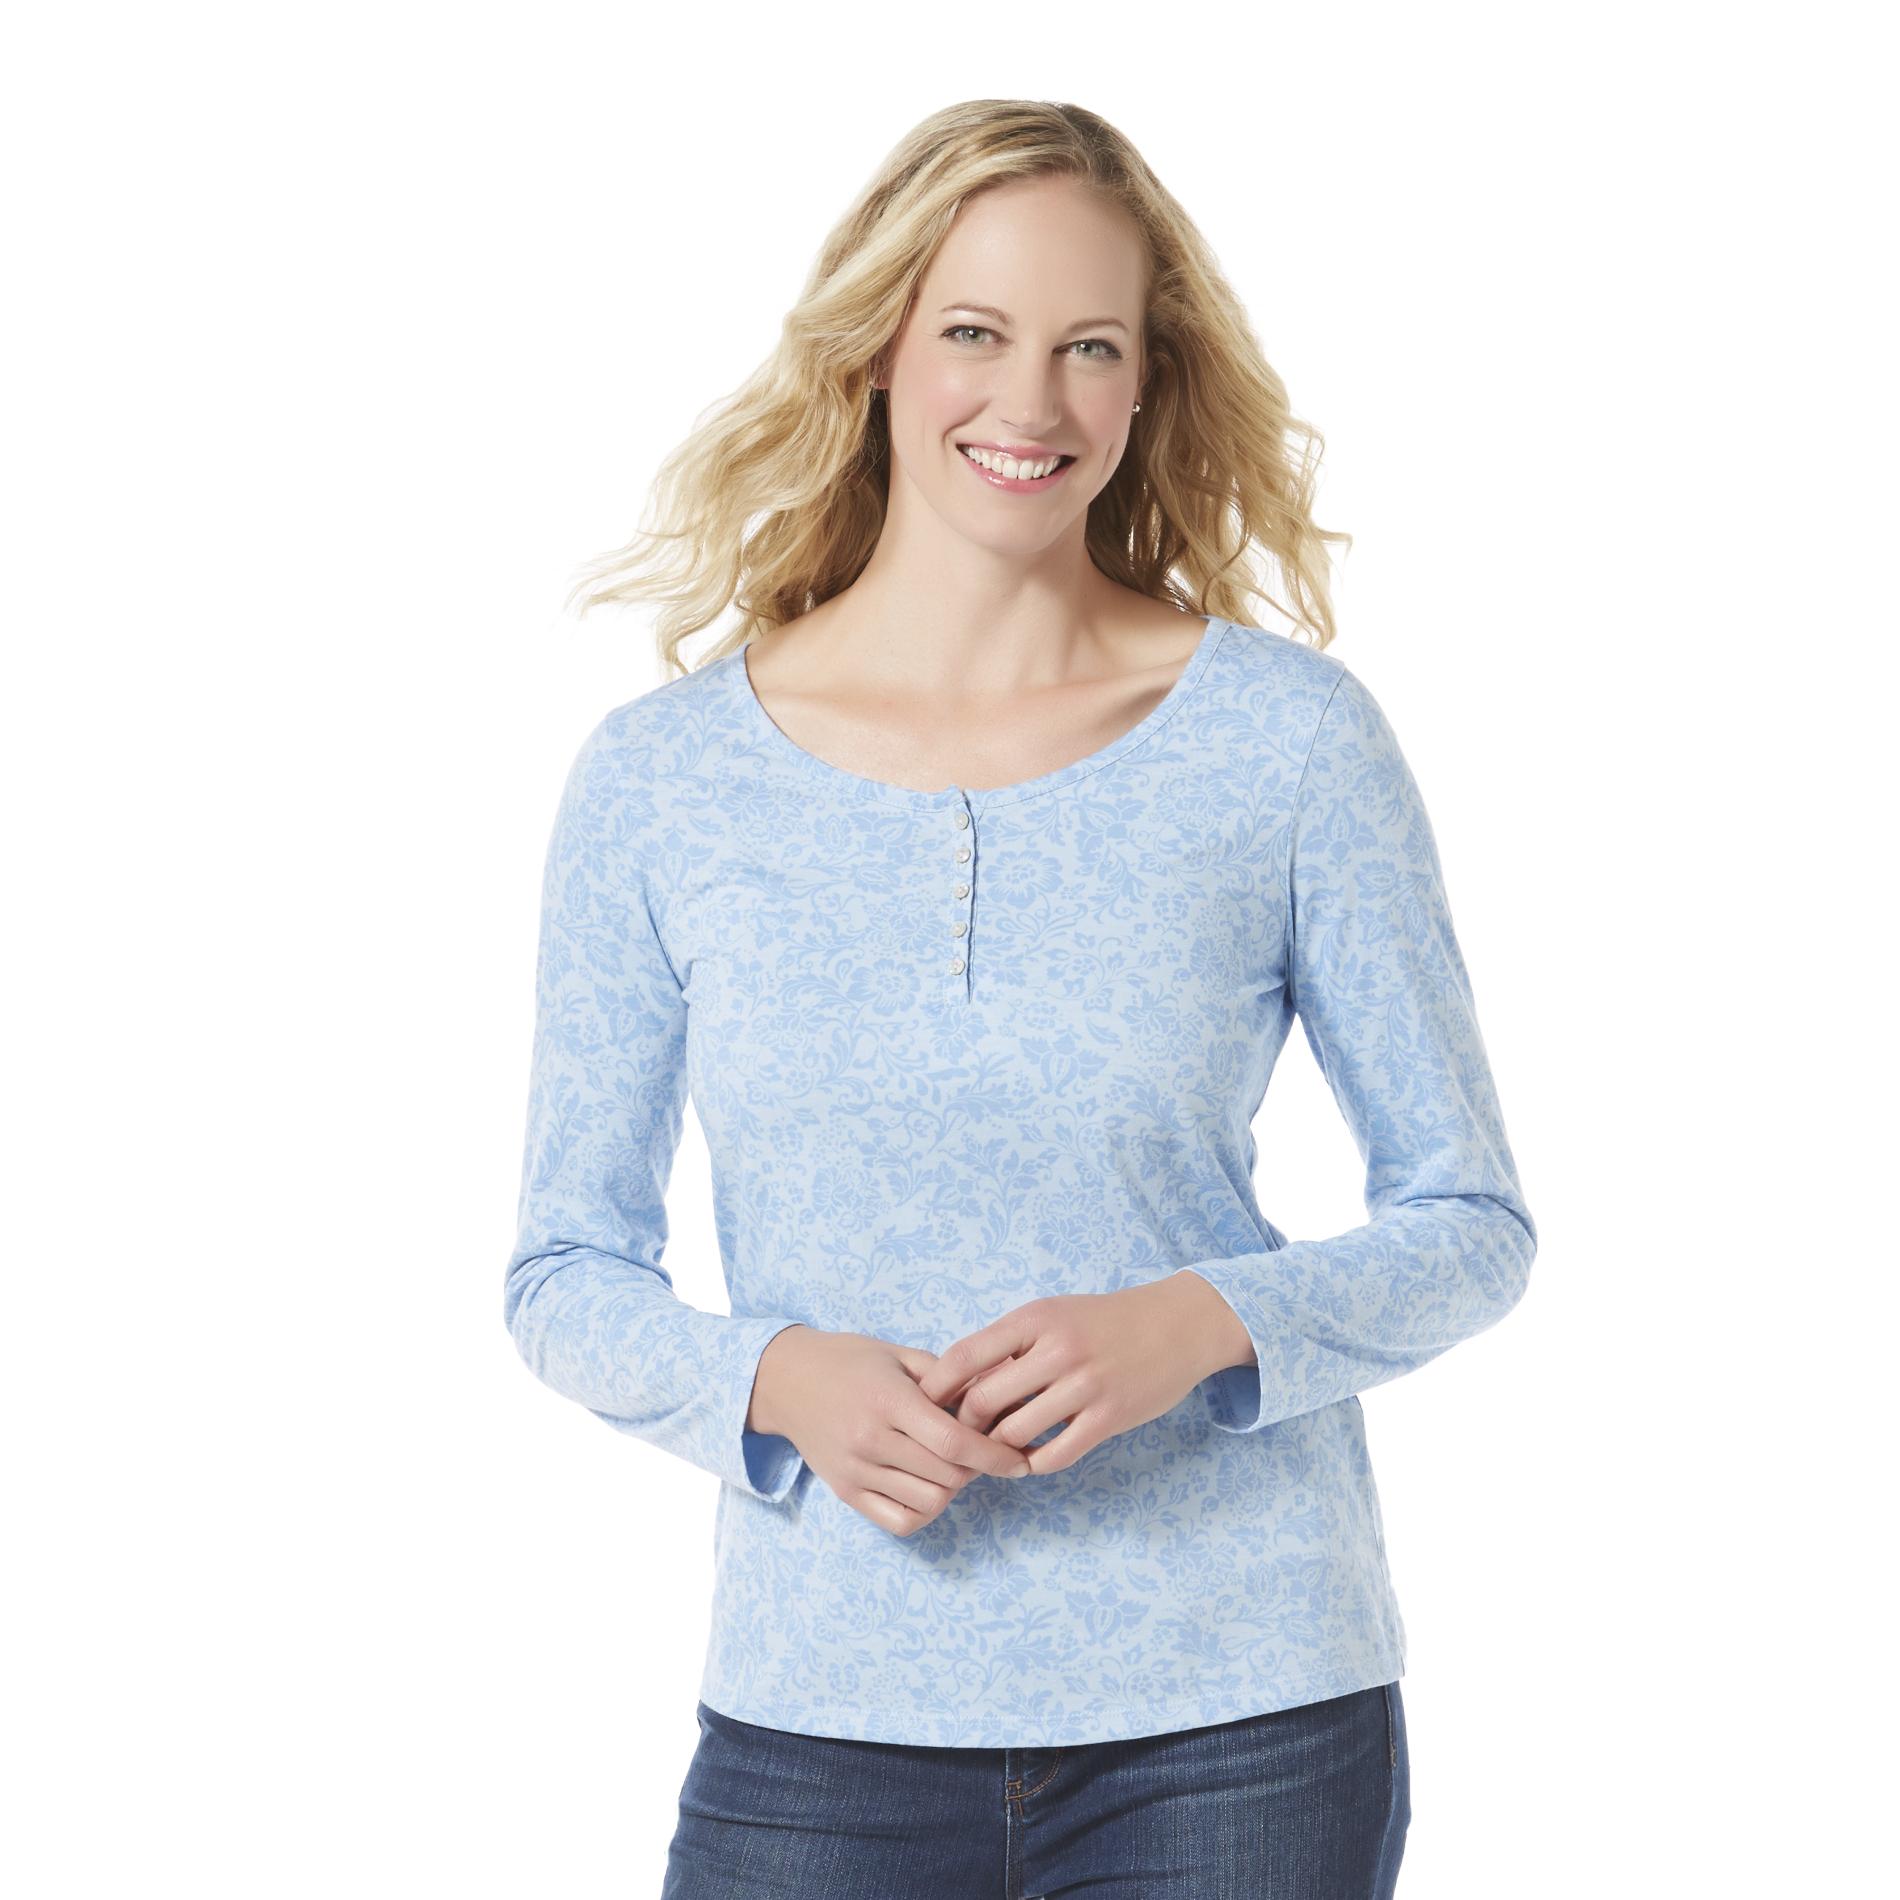 Basic Editions Women's Henley Top - Floral Print